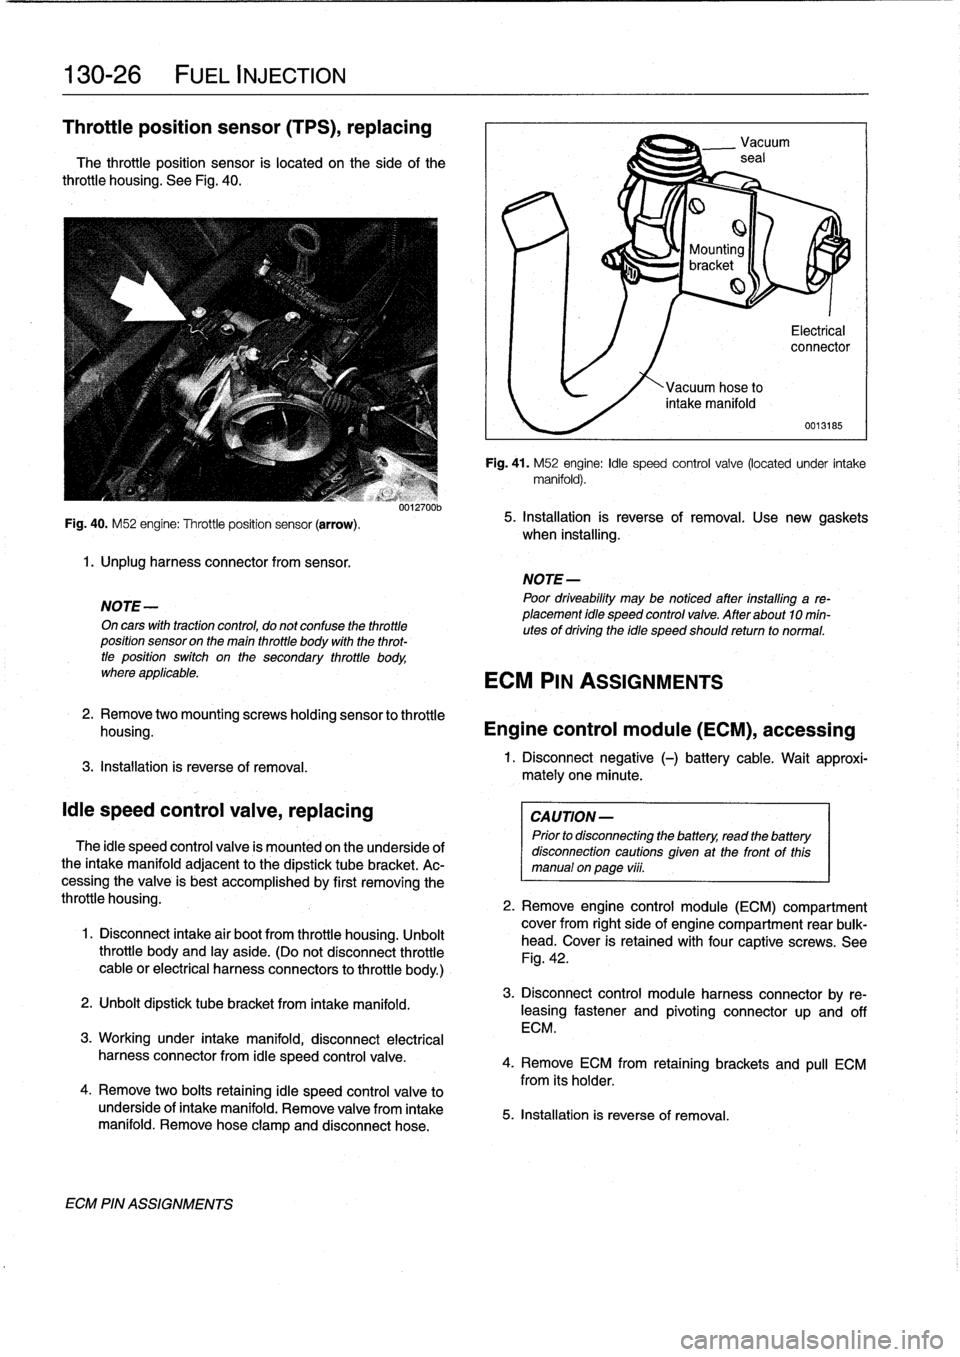 BMW 323i 1993 E36 Workshop Manual 
130-26

	

FUEL
INJECTION

Throttle
position
sensor
(TPS),
replacing

The
throttie
position
sensor
is
located
on
the
side
of
the
throttie
housing
.
See
Fig
.
40
.

Fig
.
40
.
M52
engine
:
Throttle
po